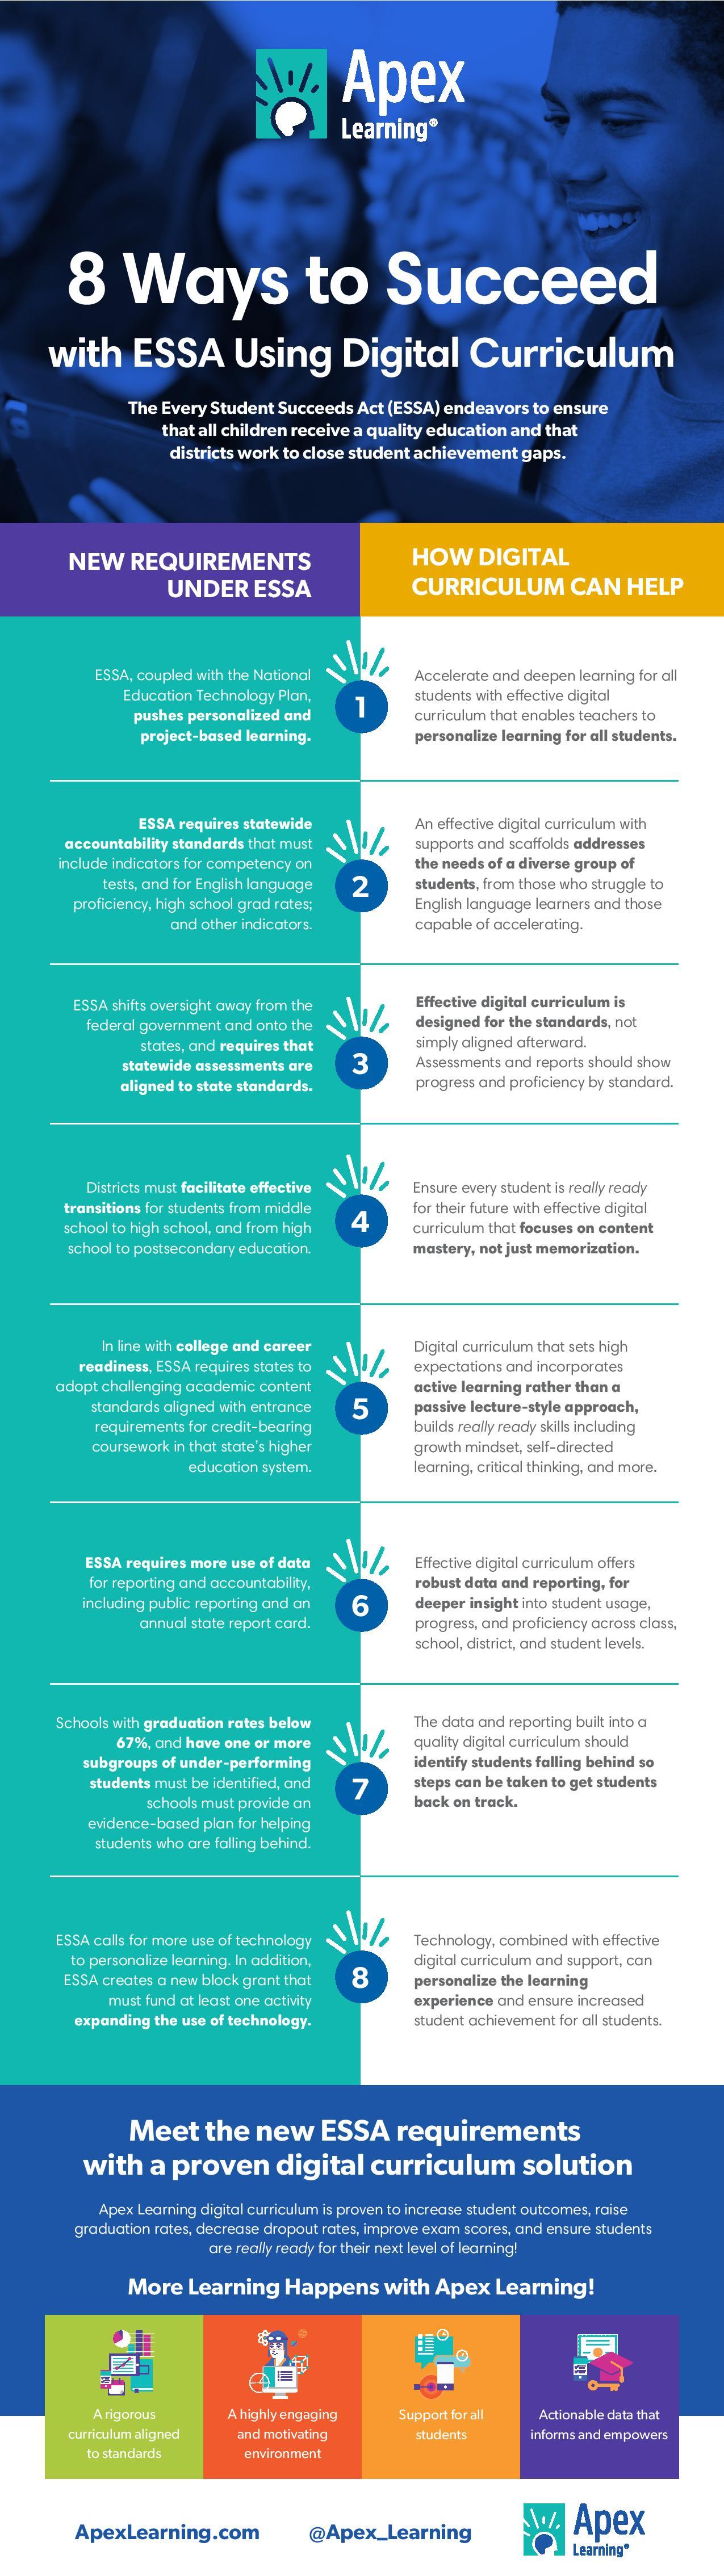 How to Succeed with ESSA Using Digital Curriculum Infographic